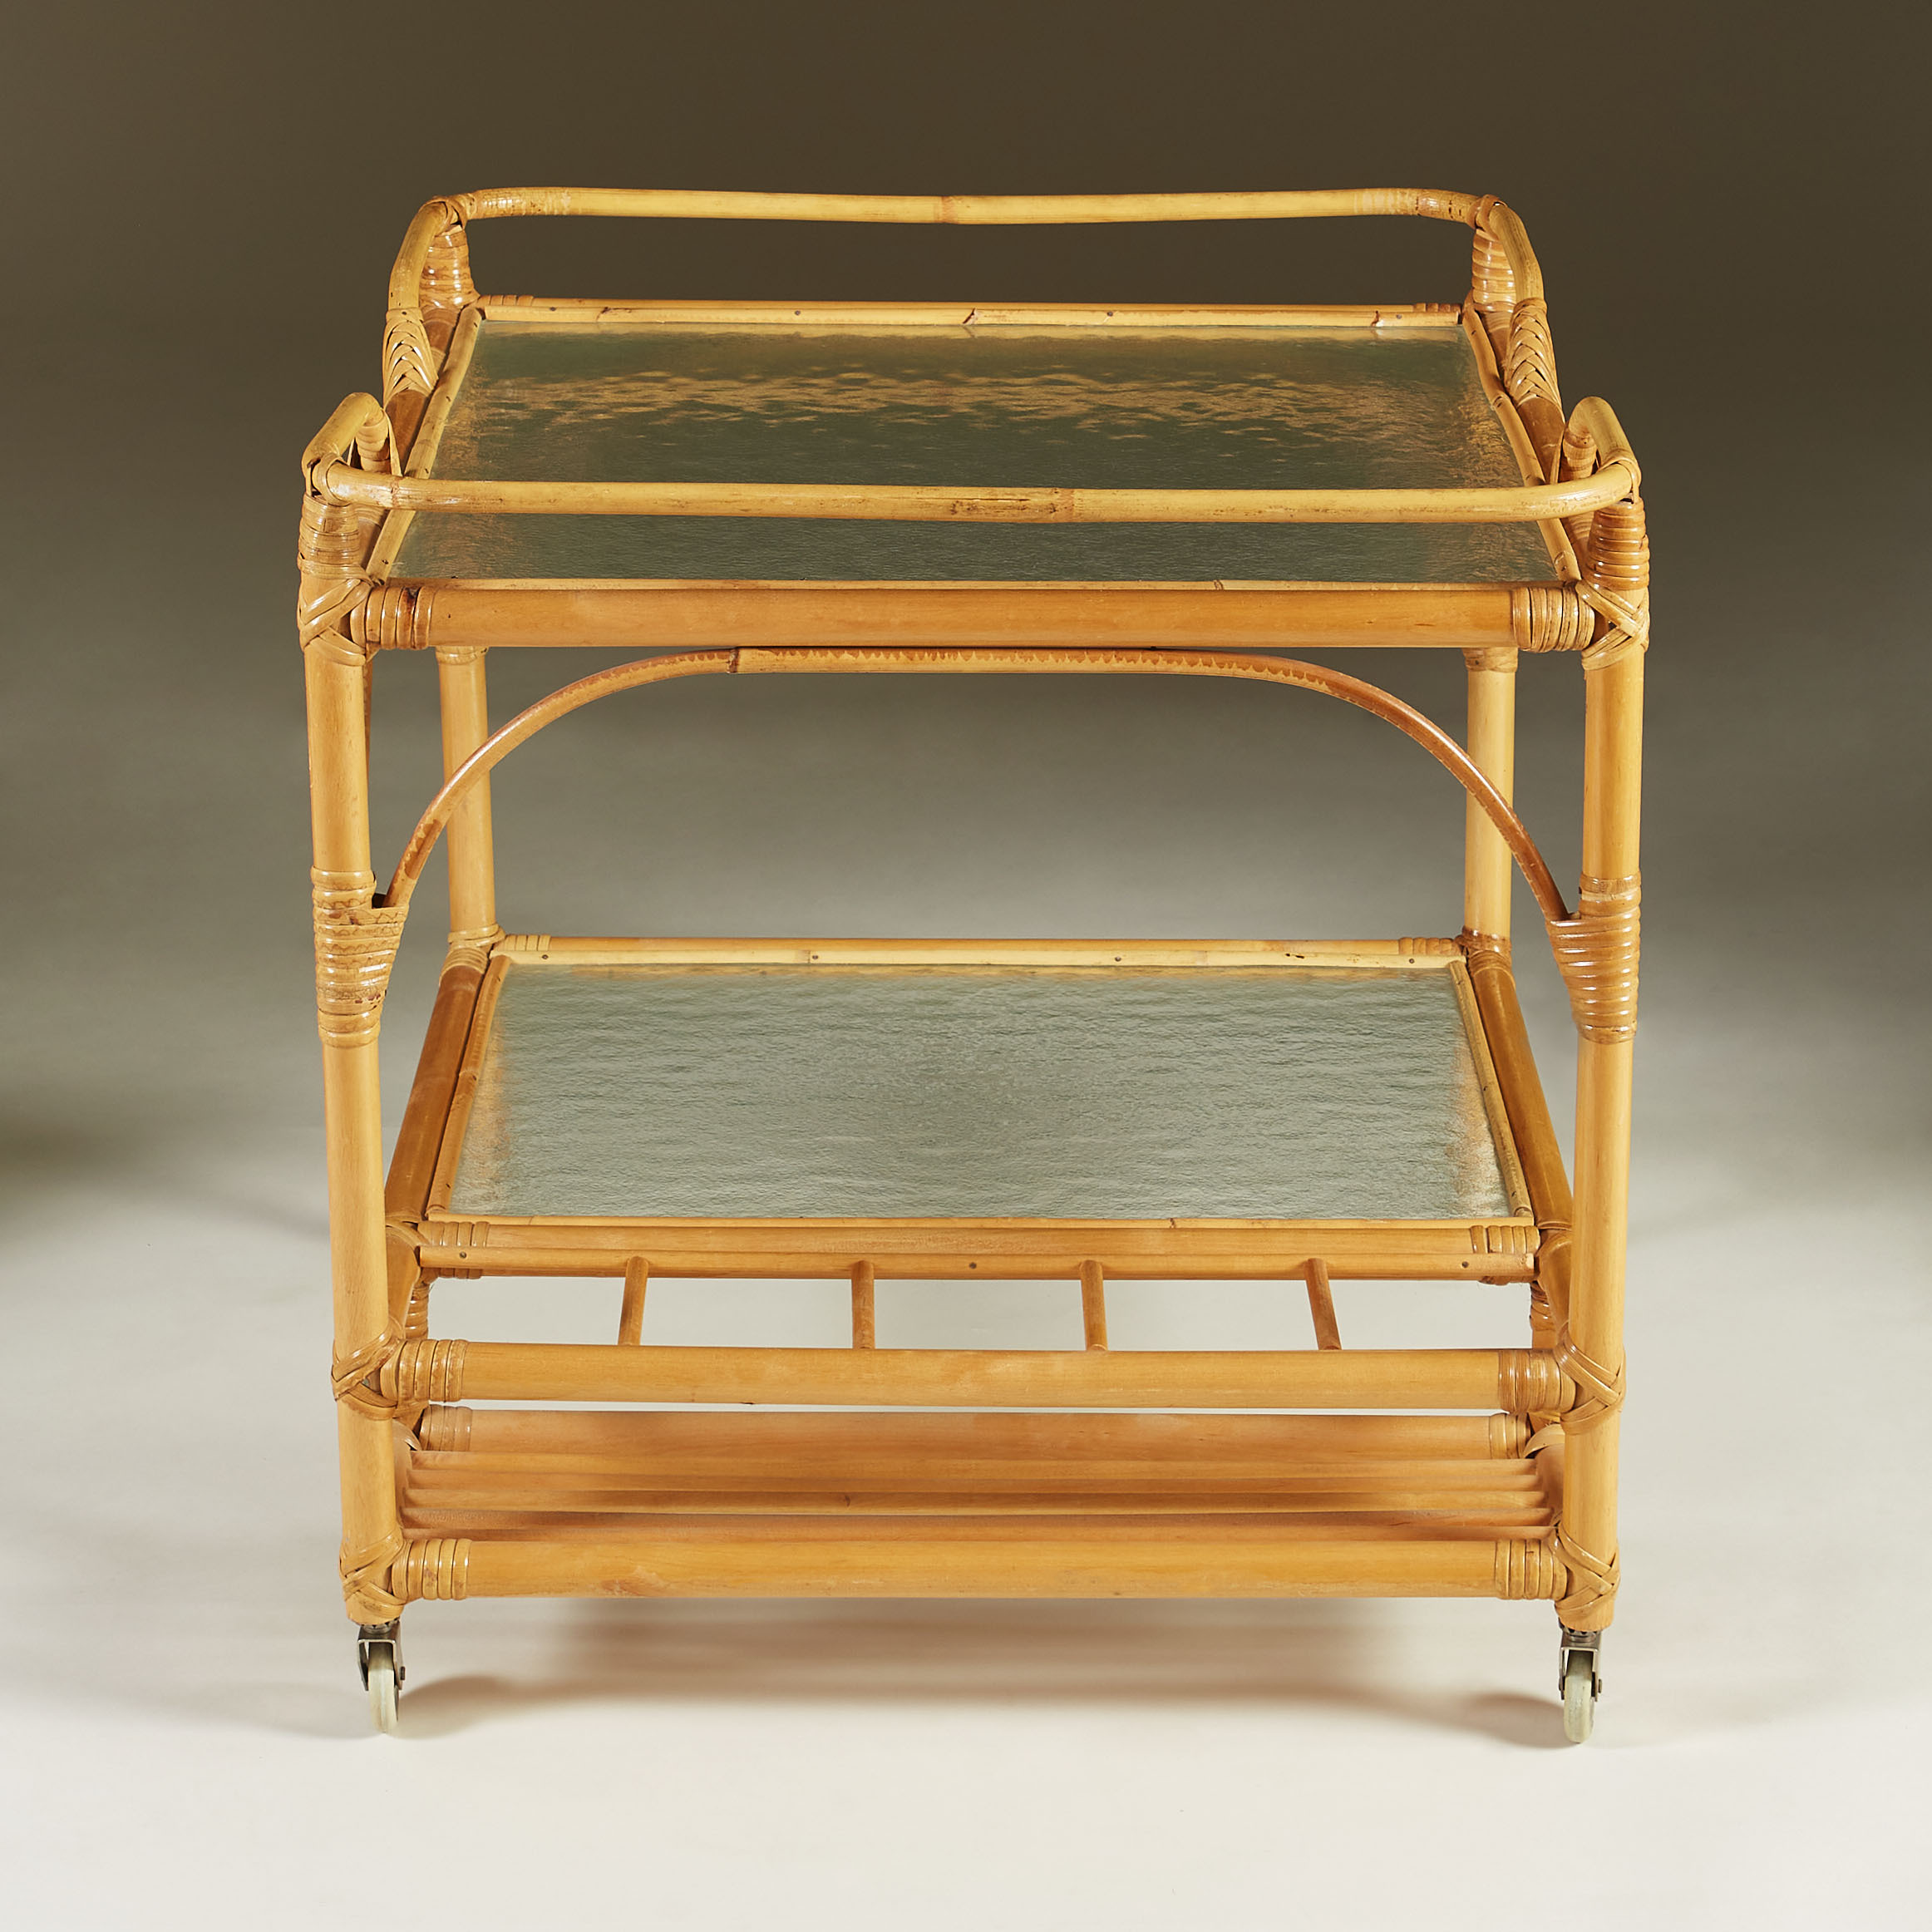 The image for Bamboo Serving Trolley Valerie Wade 0066 V1